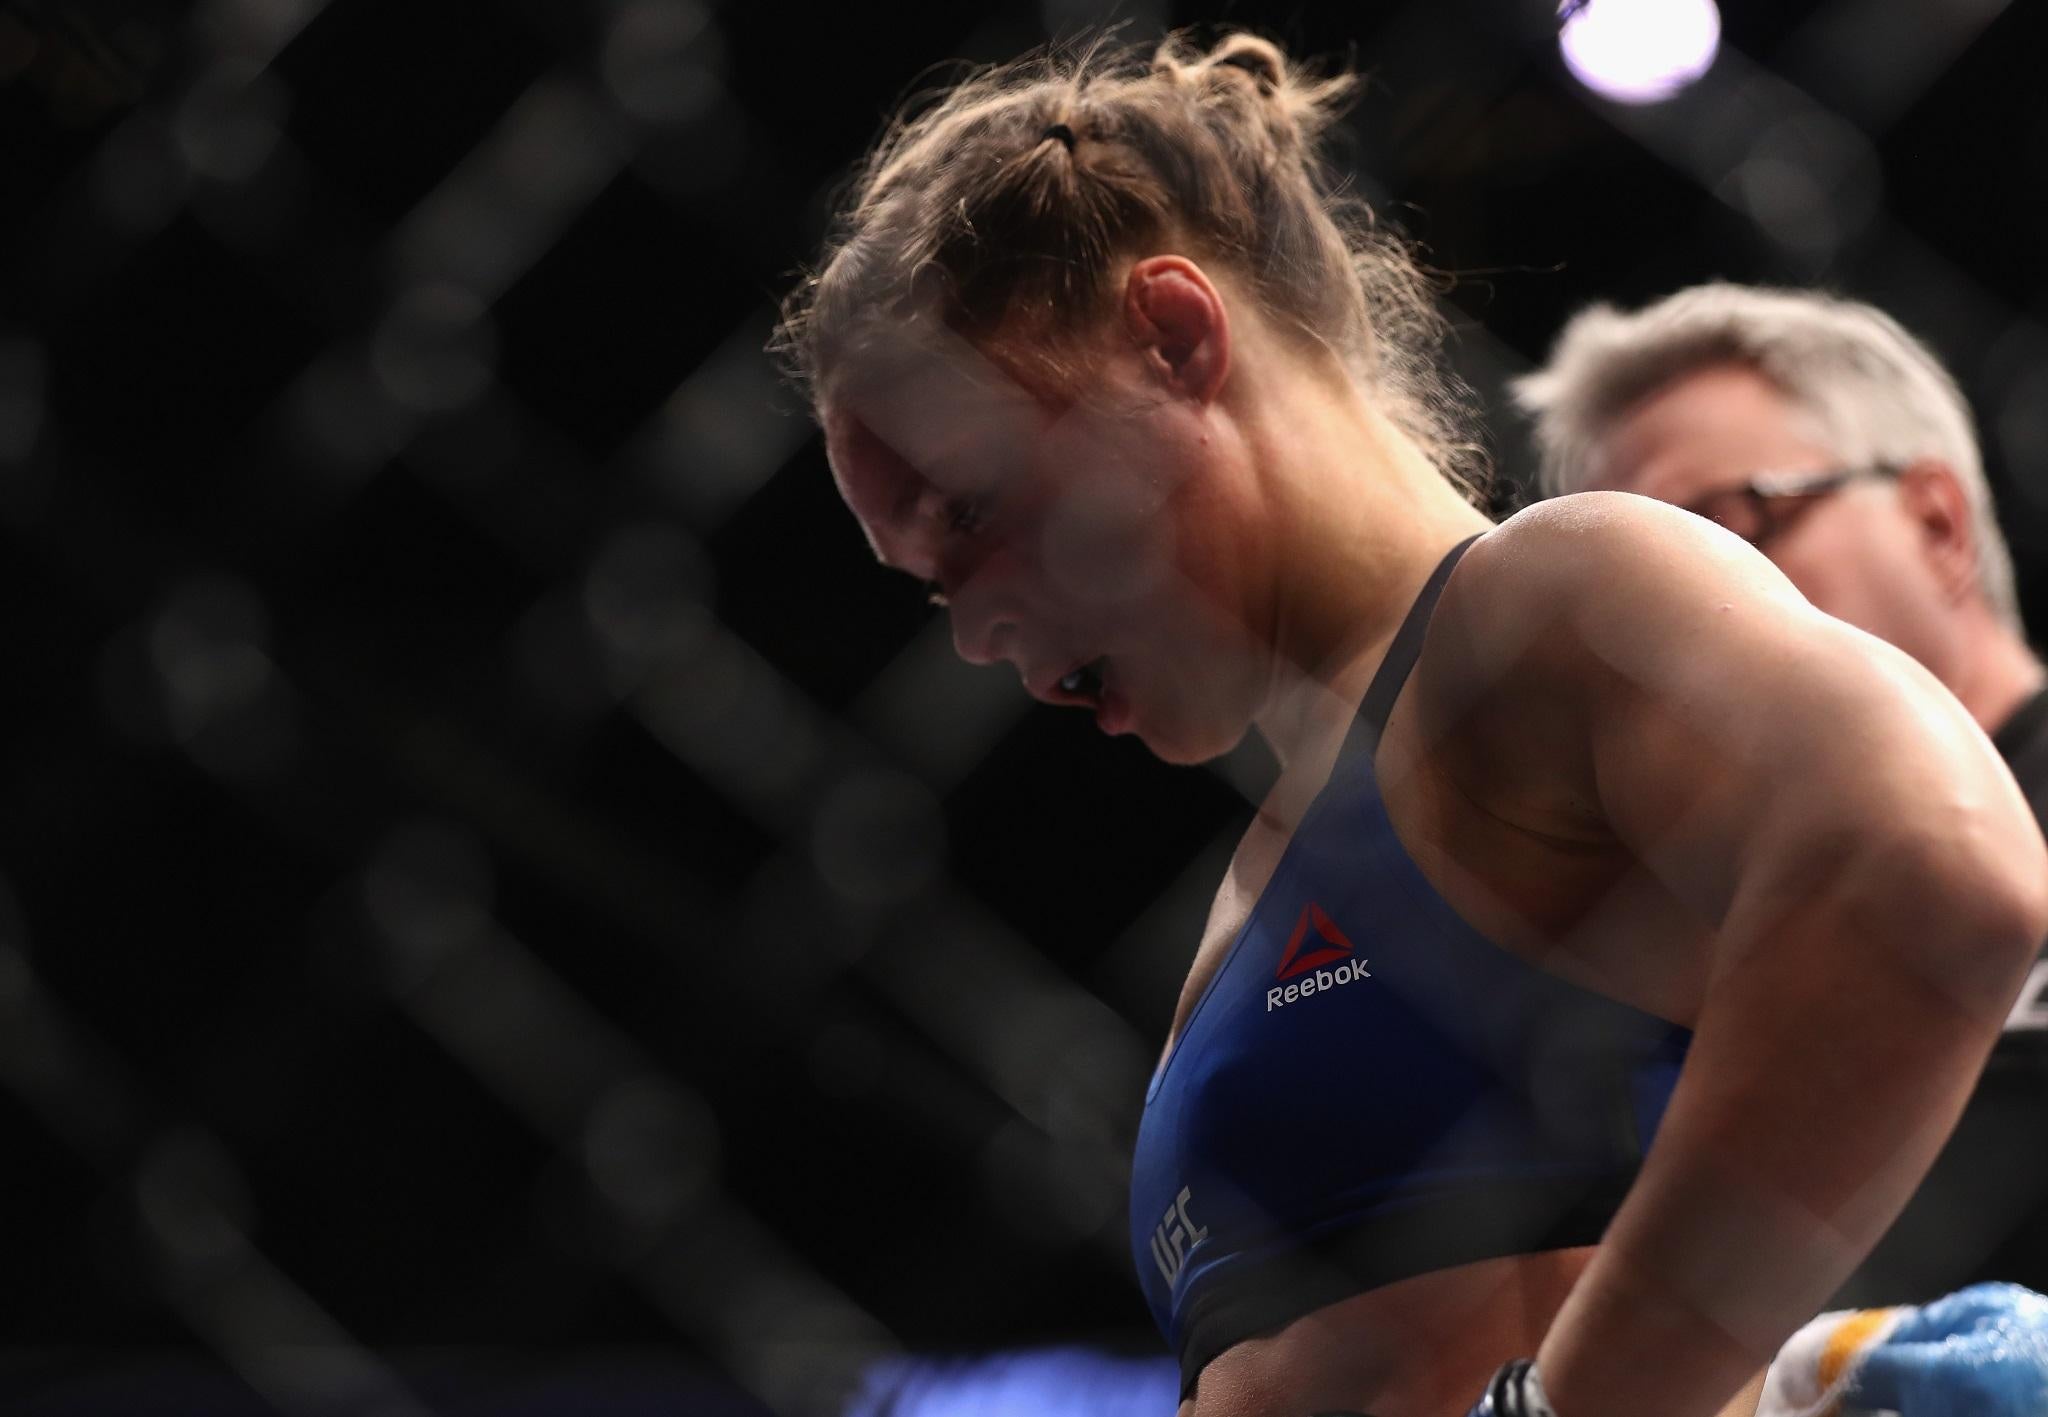 Ronda Rousey appears dejected after her 48-second defeat at UFC 207 to Amanda Nunes